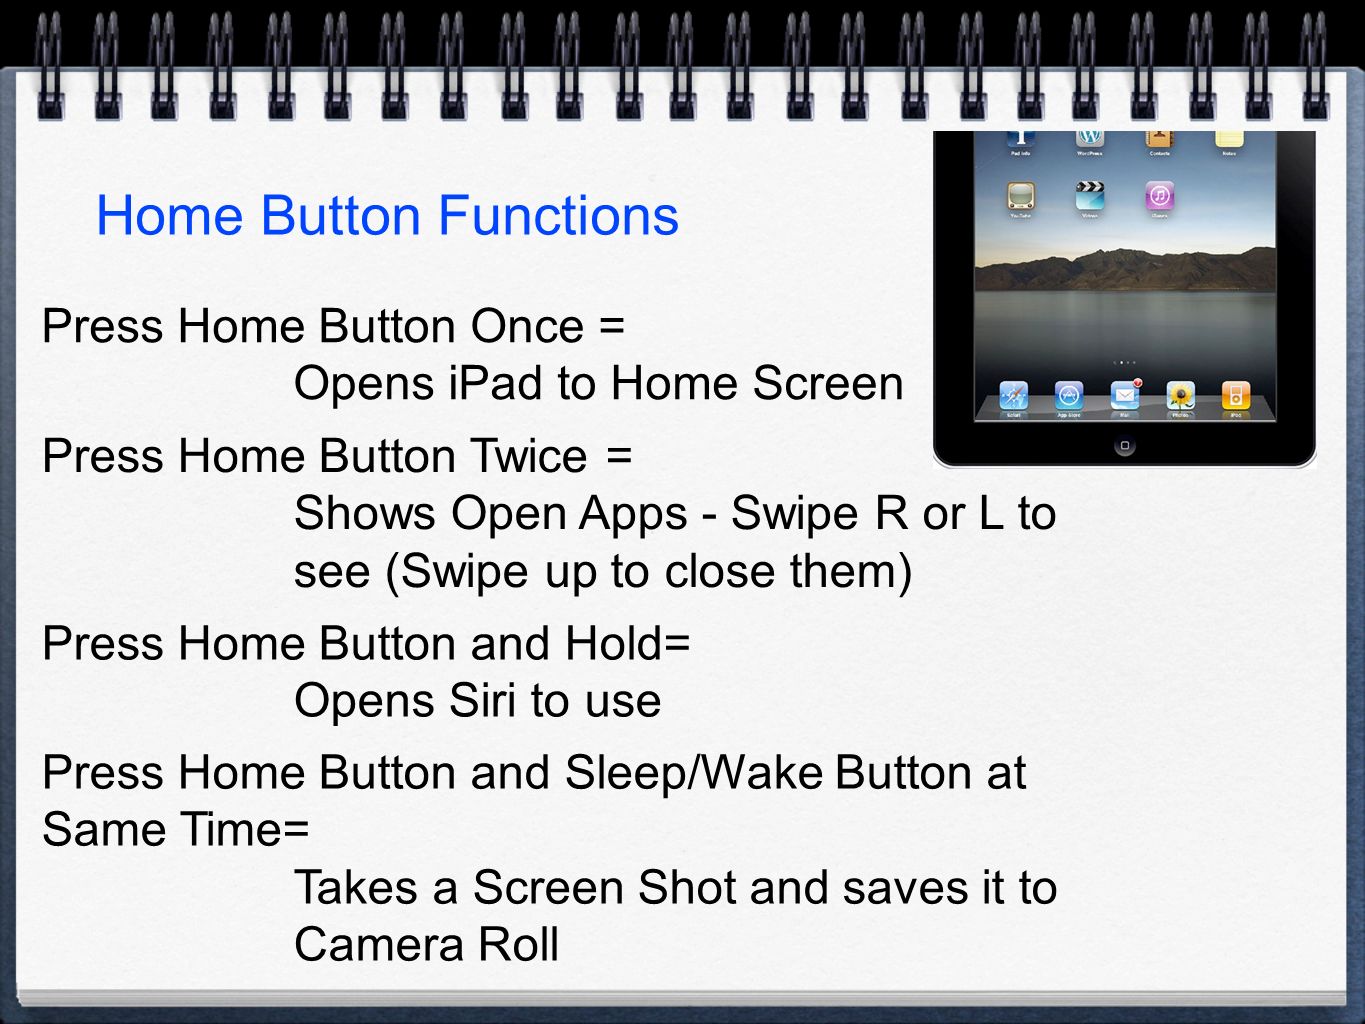 Home Button Functions Press Home Button Once = Opens iPad to Home Screen Press Home Button Twice = Shows Open Apps - Swipe R or L to see (Swipe up to close them) Press Home Button and Hold= Opens Siri to use Press Home Button and Sleep/Wake Button at Same Time= Takes a Screen Shot and saves it to Camera Roll